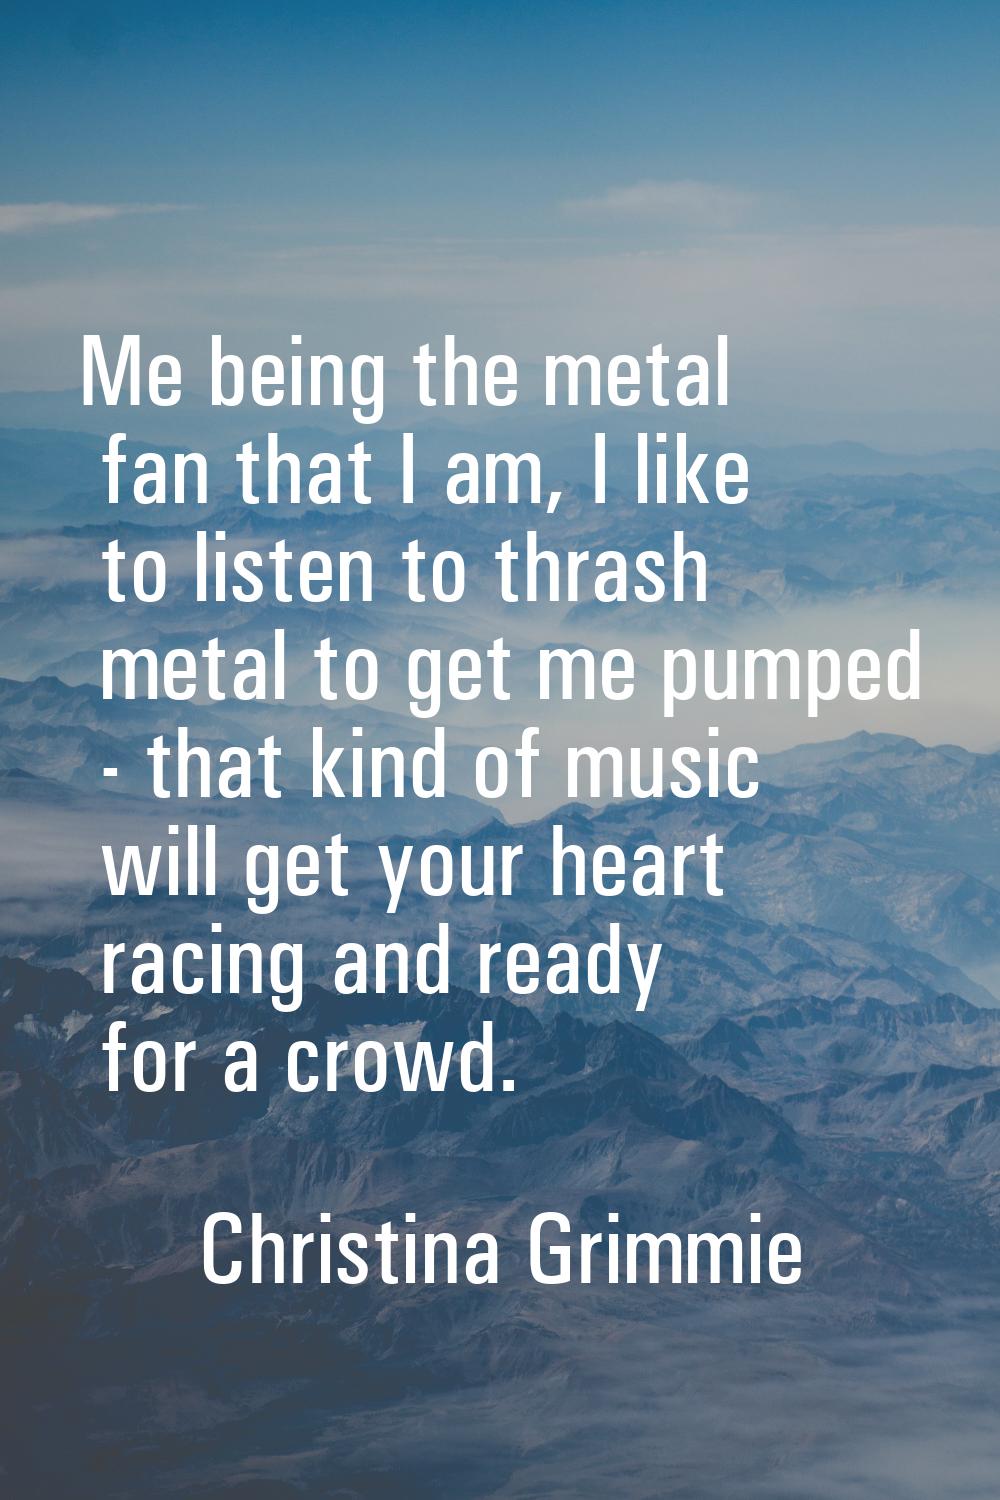 Me being the metal fan that I am, I like to listen to thrash metal to get me pumped - that kind of 